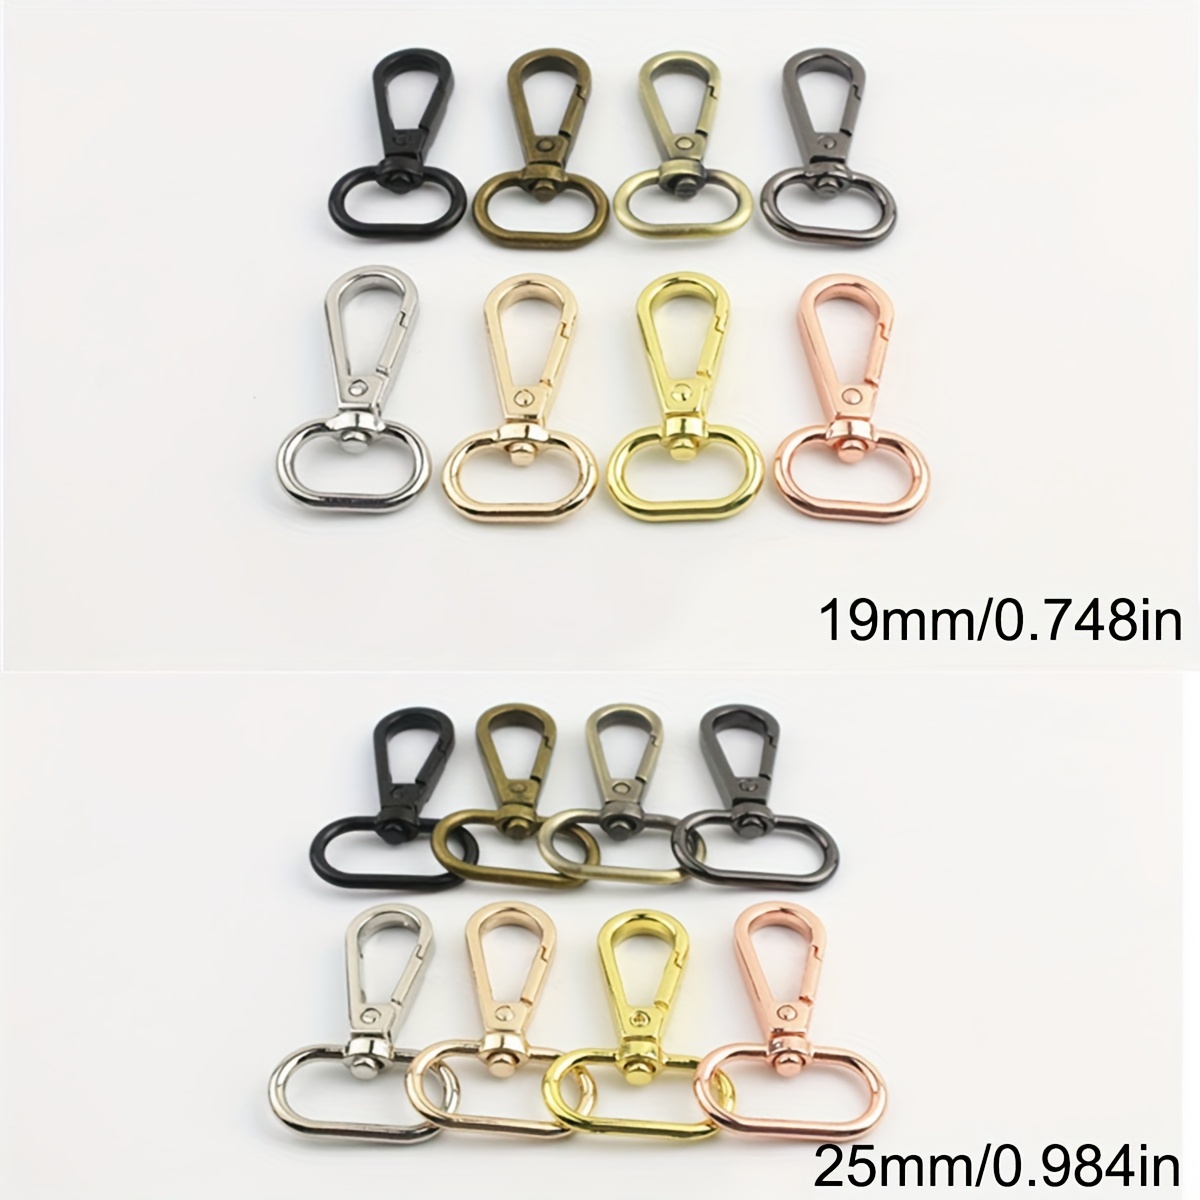 1, 5 or 10 Keychains, Quality Checked, read Description, Swivel, Split Ring  Gold, Red Copper, Silver, Black, Rainbow, Rose, Bronze 